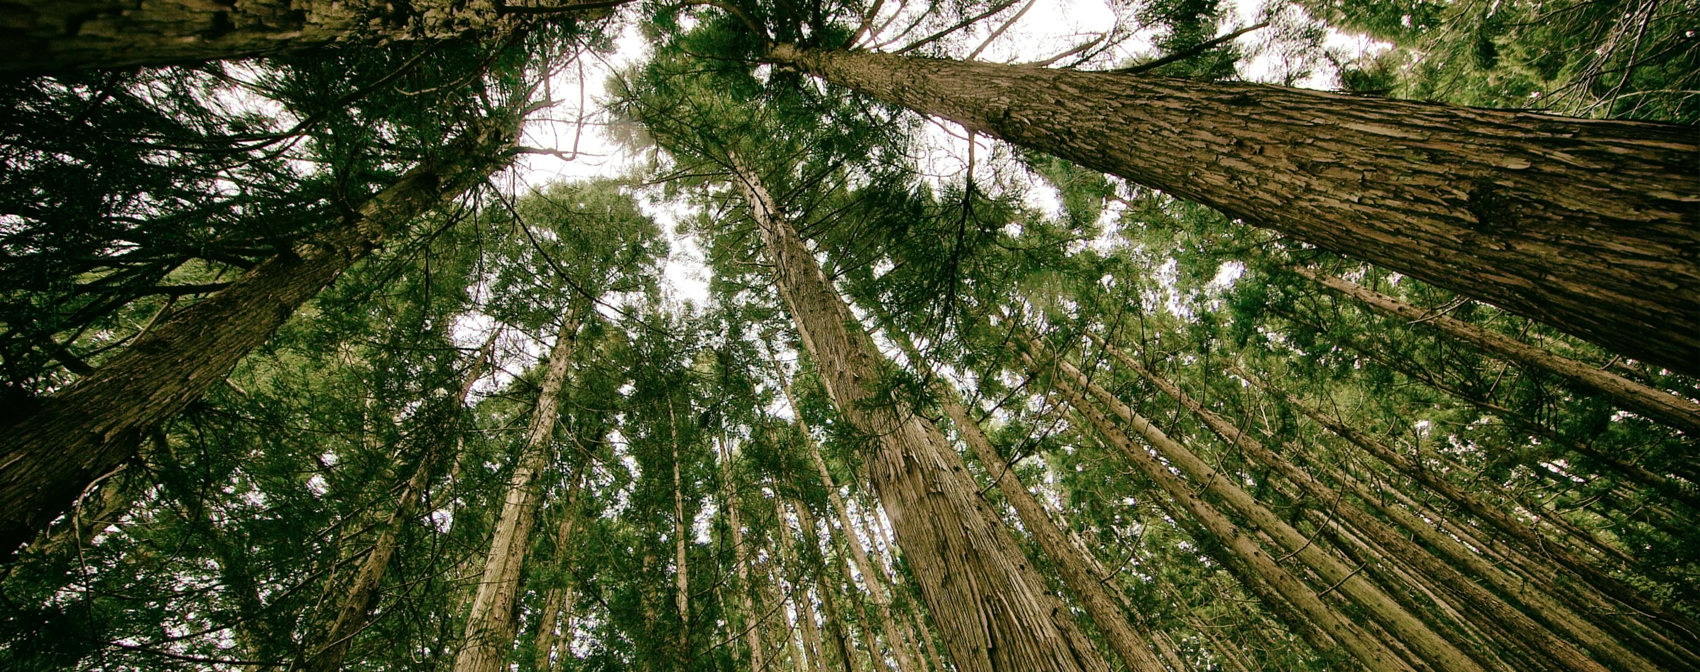 a vertical photo taken in the middle of a forest with pine trees shooting upwards